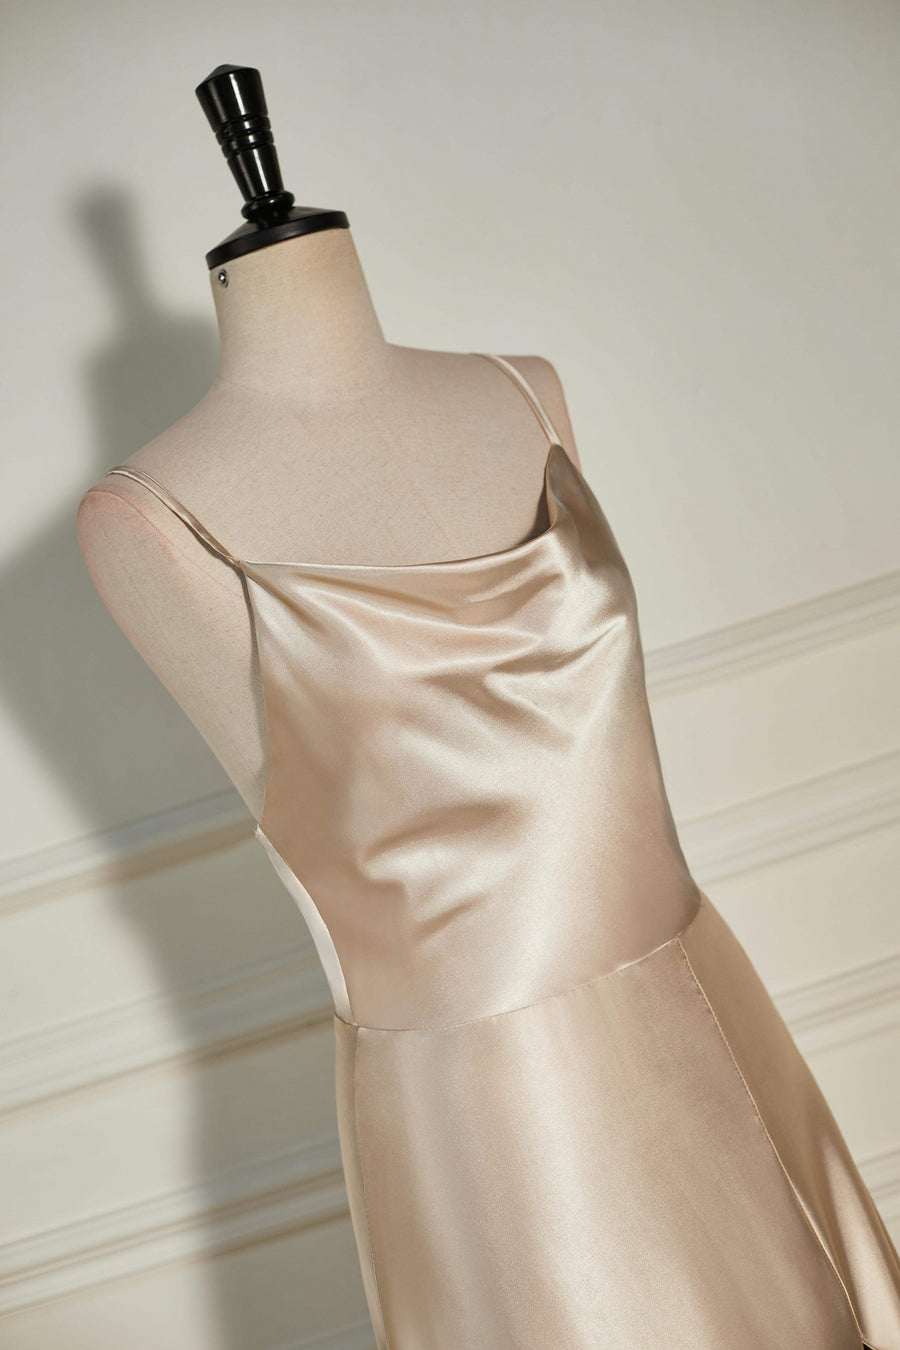 Champagne Cowl Neck Straps A-line Satin Long Bridesmaid Dress with Slit